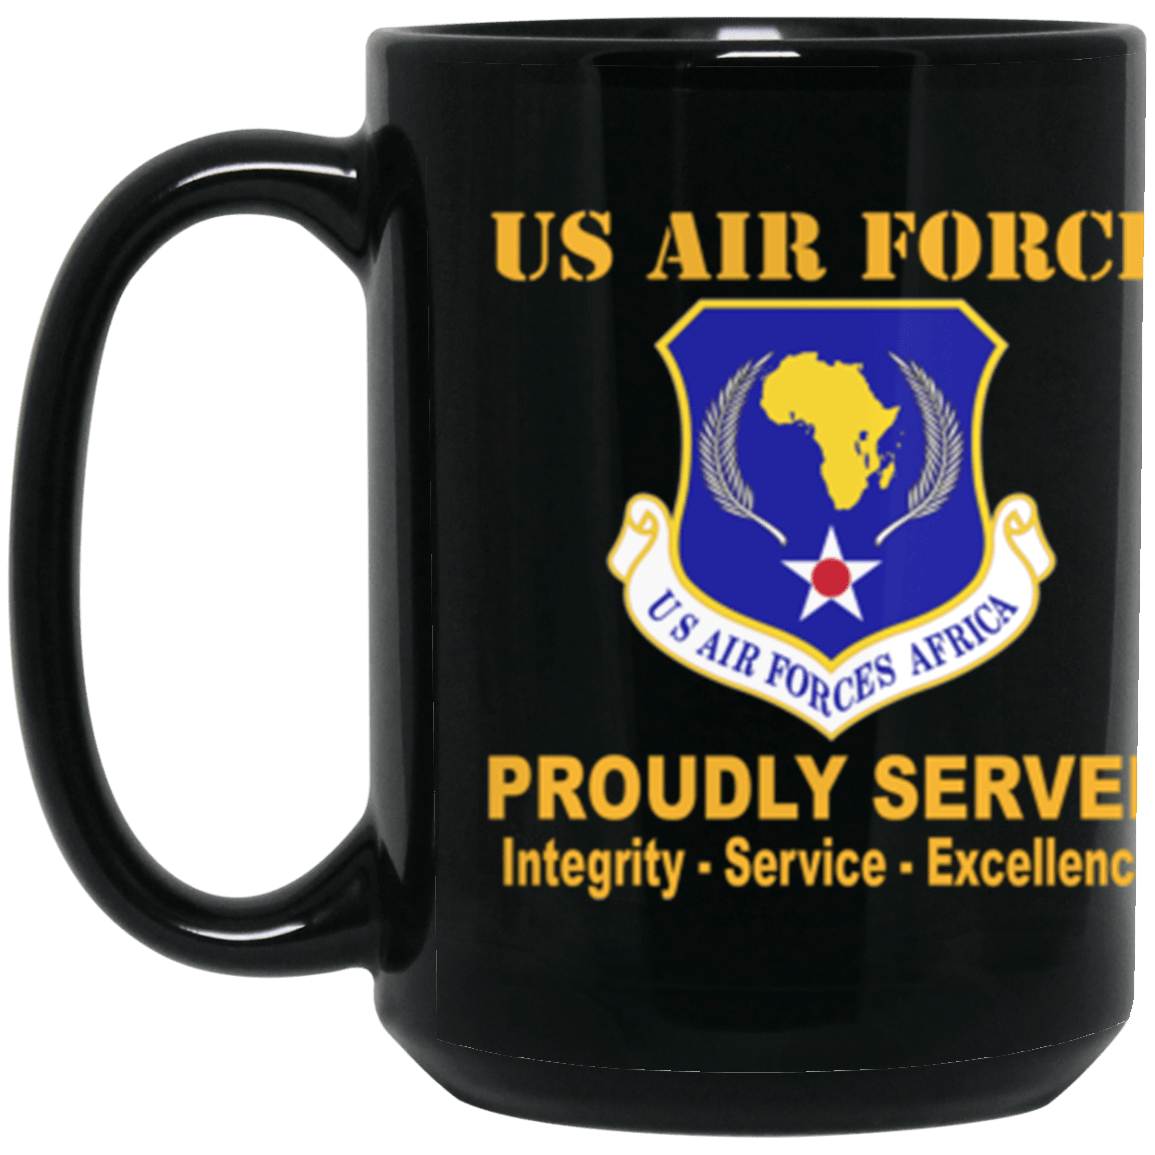 United States Air Forces Africa Proudly Served Core Values 15 oz. Black Mug-Drinkware-Veterans Nation